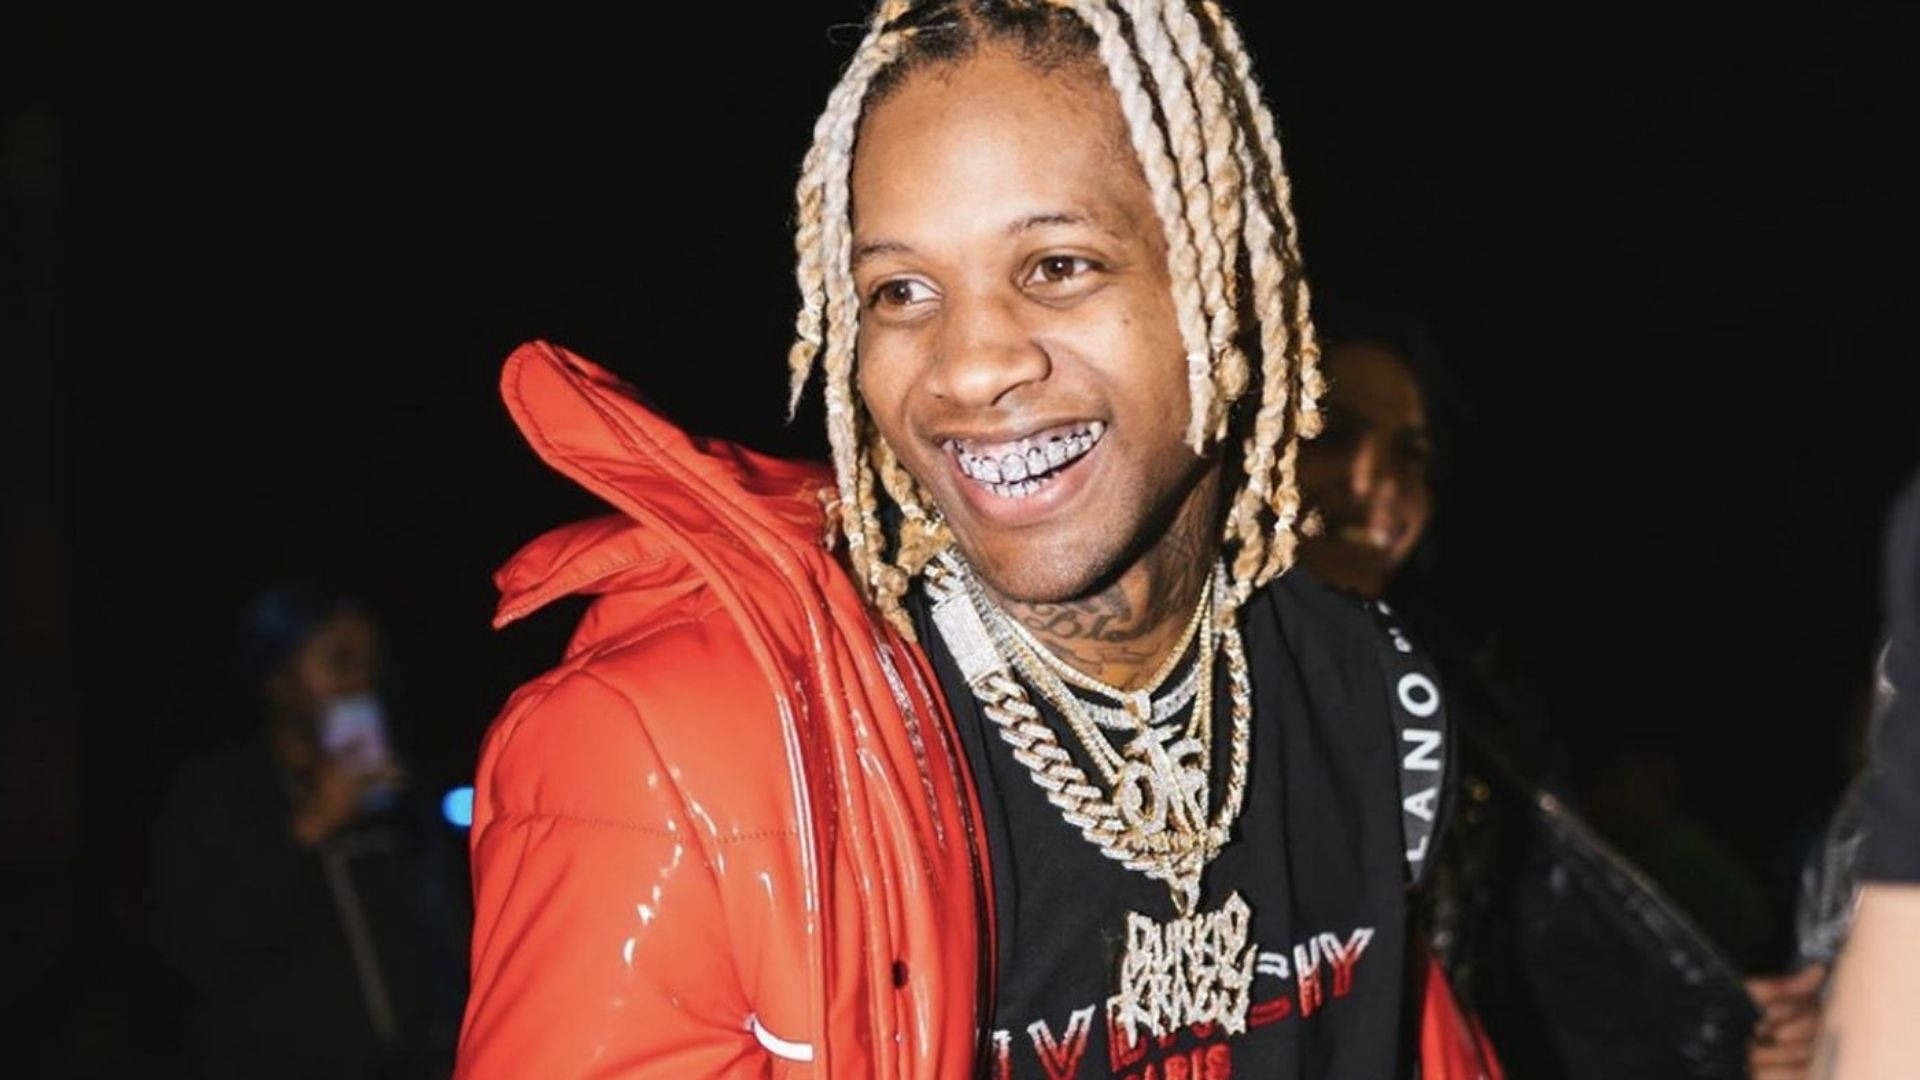 Smiling Lil Durk In Crowd